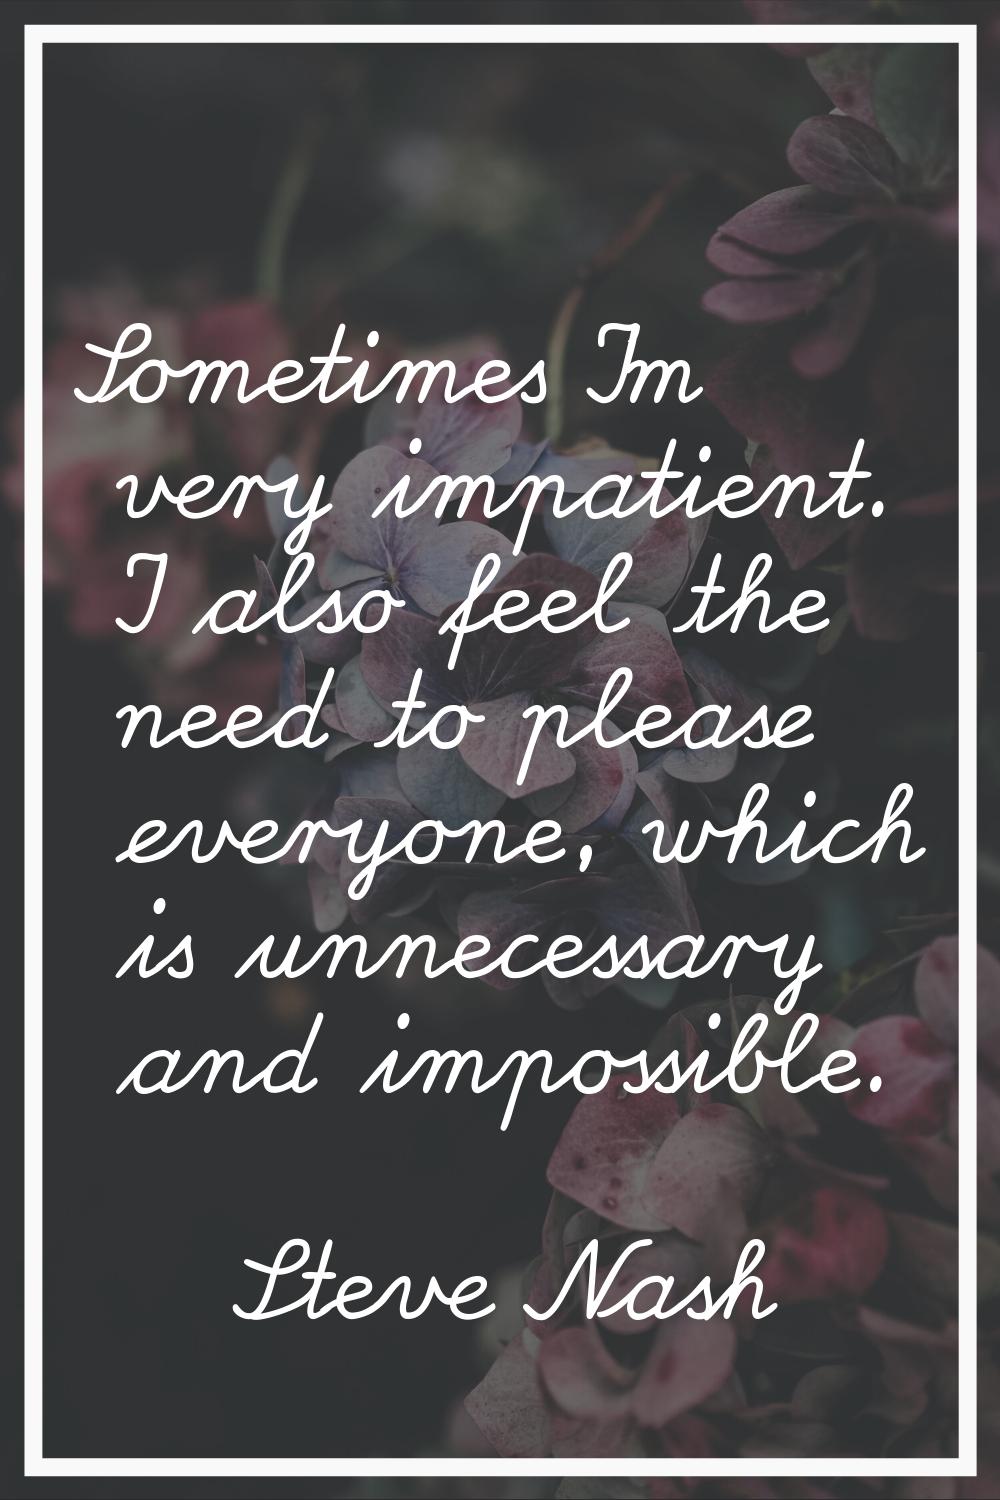 Sometimes I'm very impatient. I also feel the need to please everyone, which is unnecessary and imp